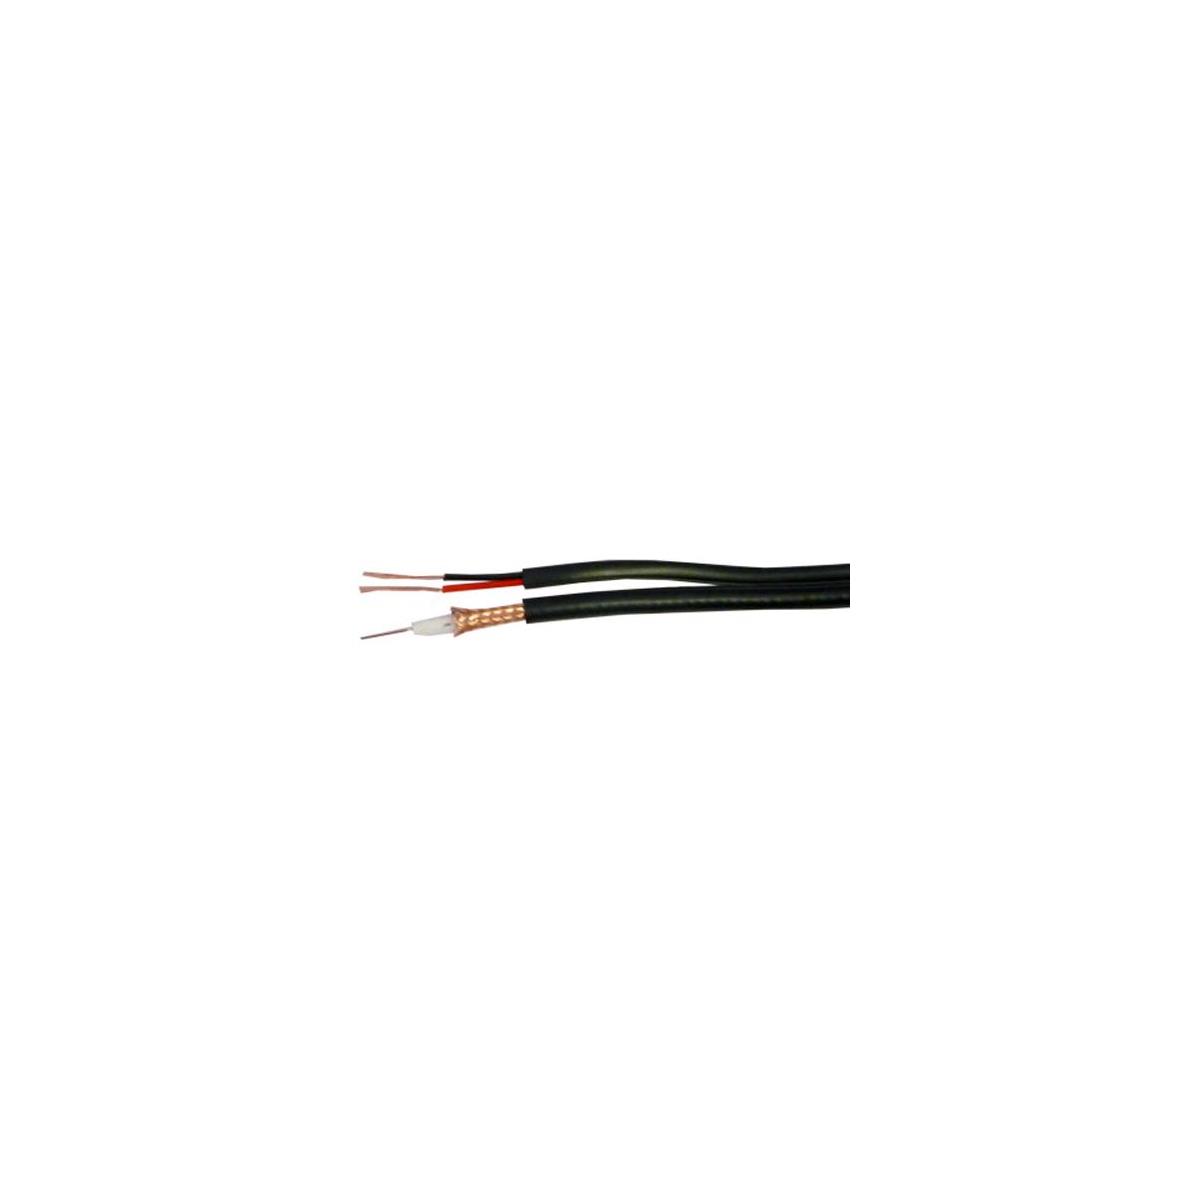 Image of Comprehensive 1000' Siamese Security/CCTV Cable with RG59/U + 2x 18AWG